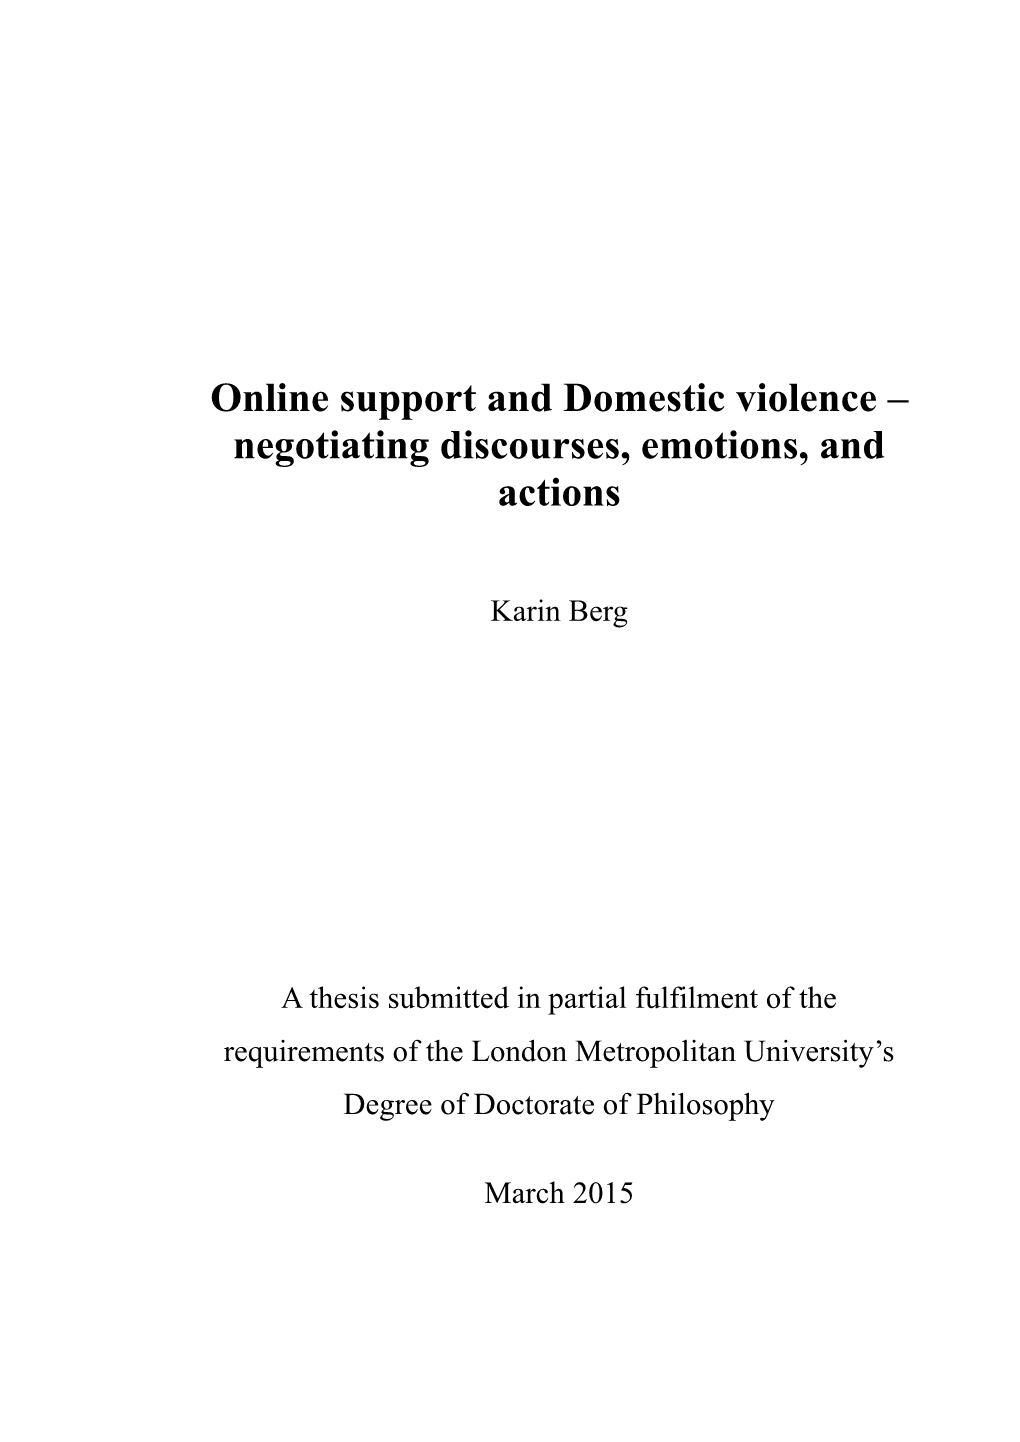 Online Support and Domestic Violence – Negotiating Discourses, Emotions, and Actions